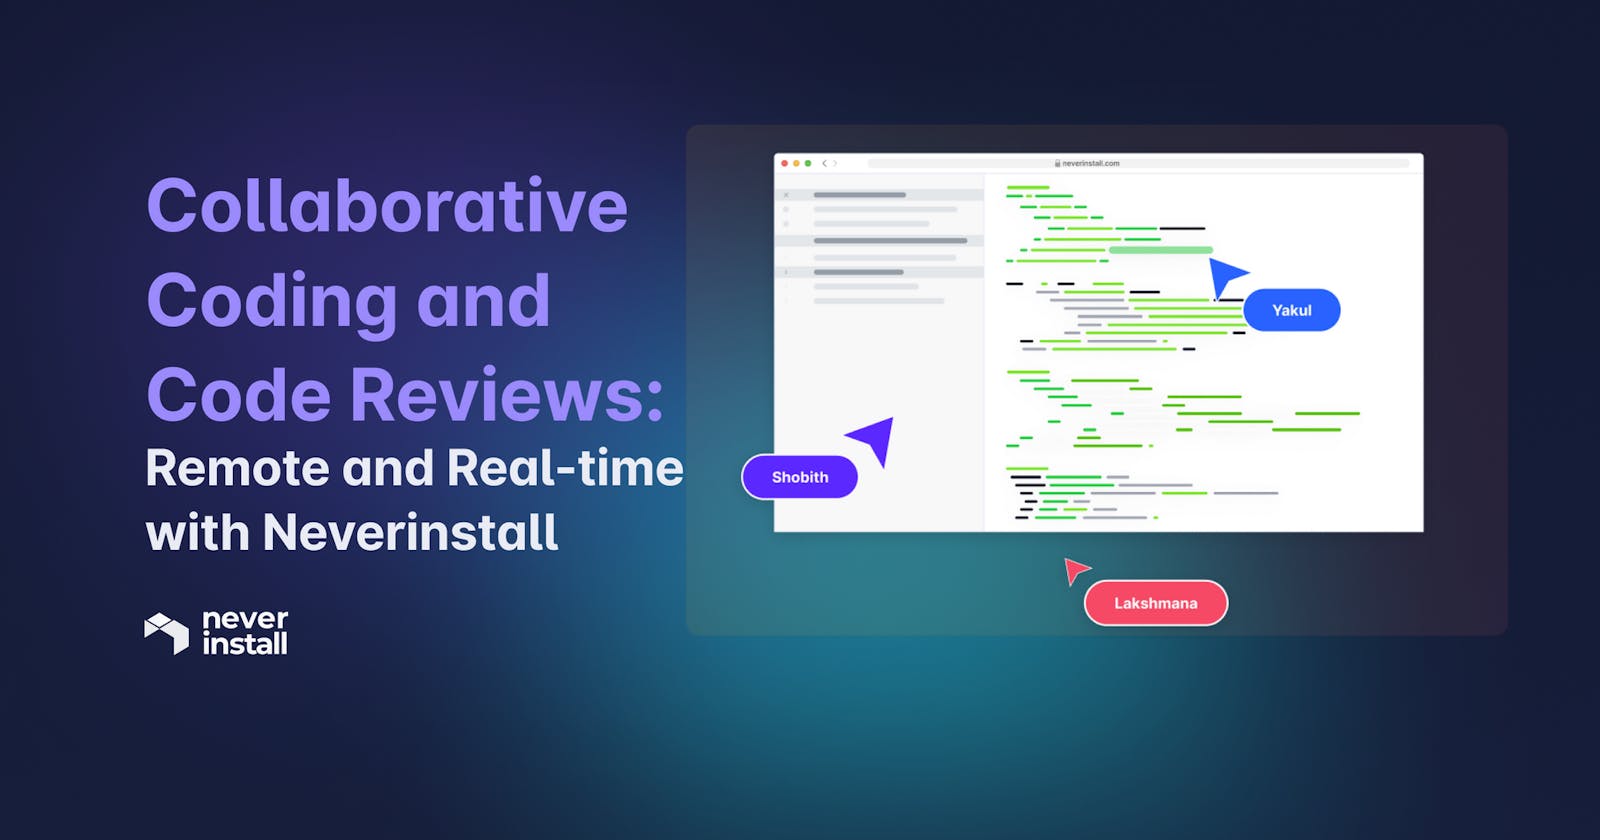 Collaborative Coding and Reviews: Remote and Real-Time with Neverinstall